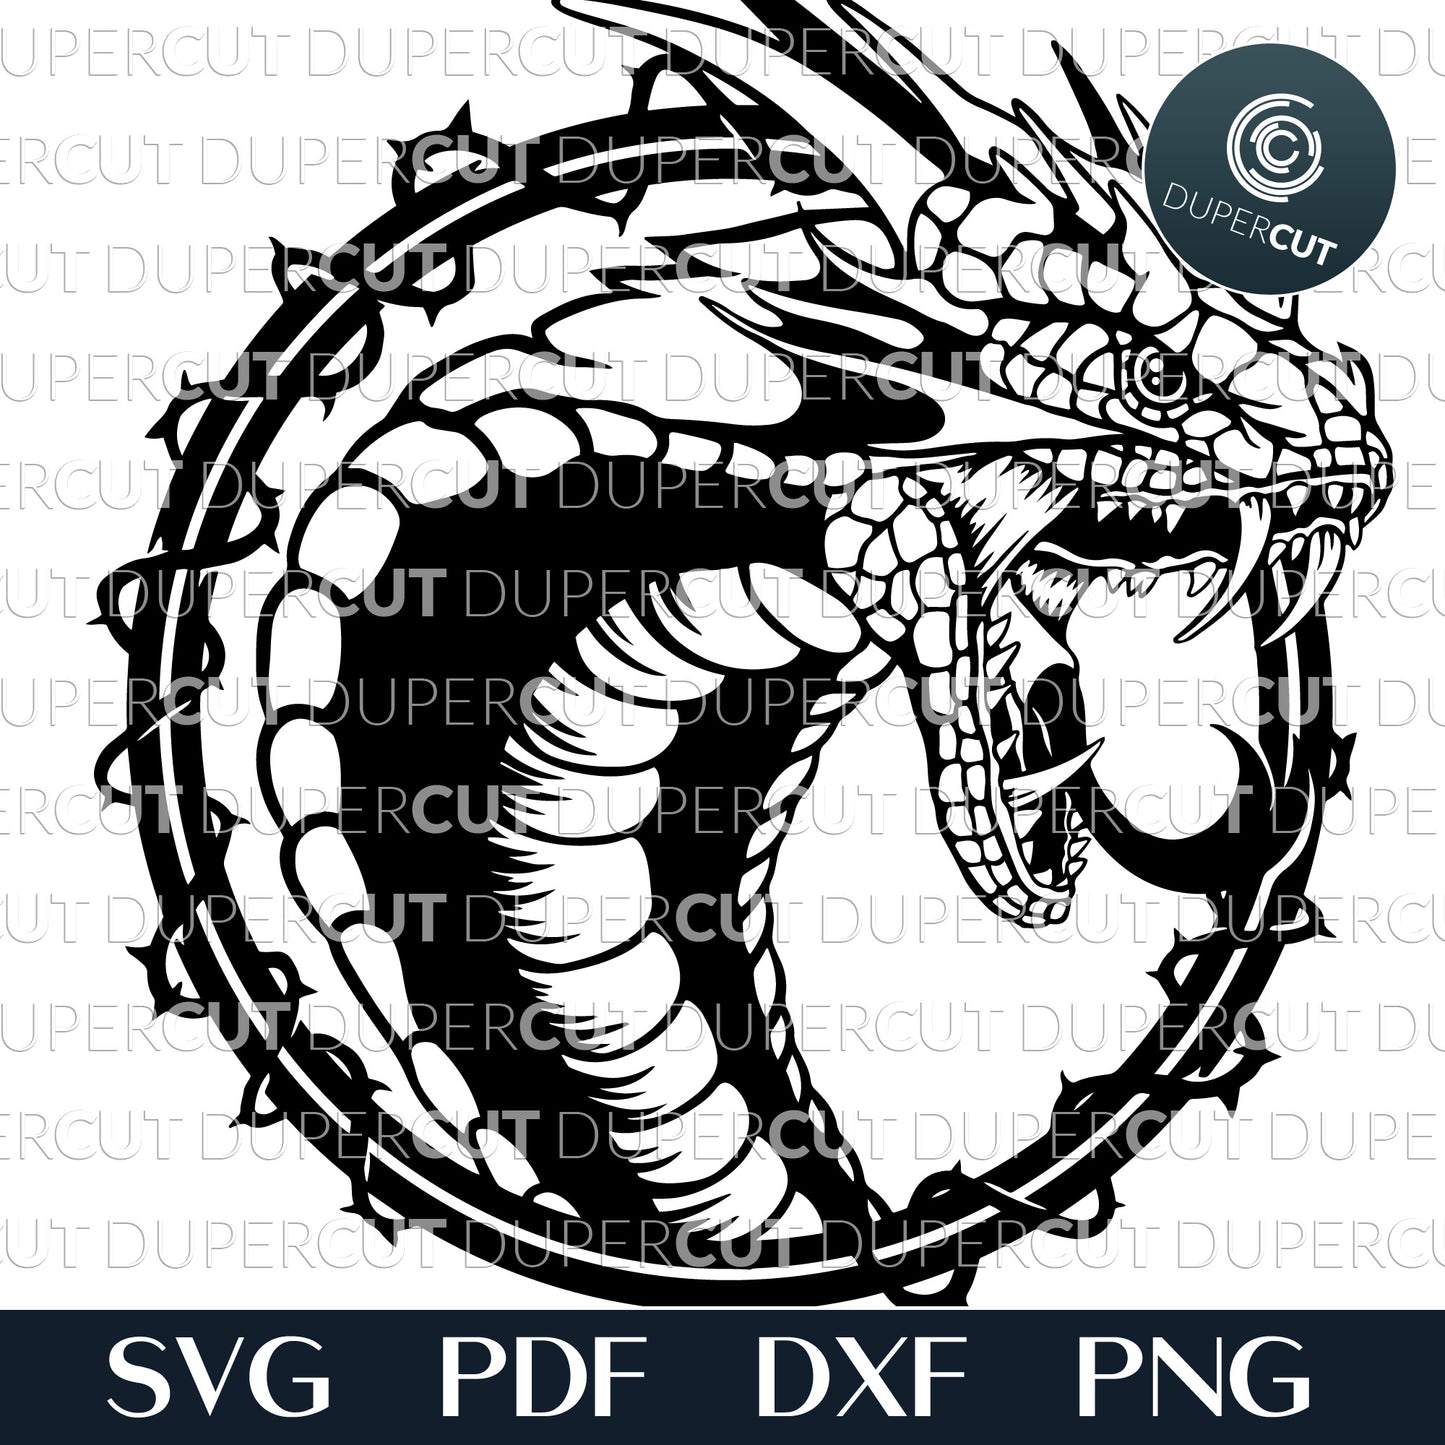 Roaring dragon snake - steampunk tattoo design - SVG PDF PNG vector files for paper cutting, laser machines, Cricut, Silhouette Cameo, Glowforge